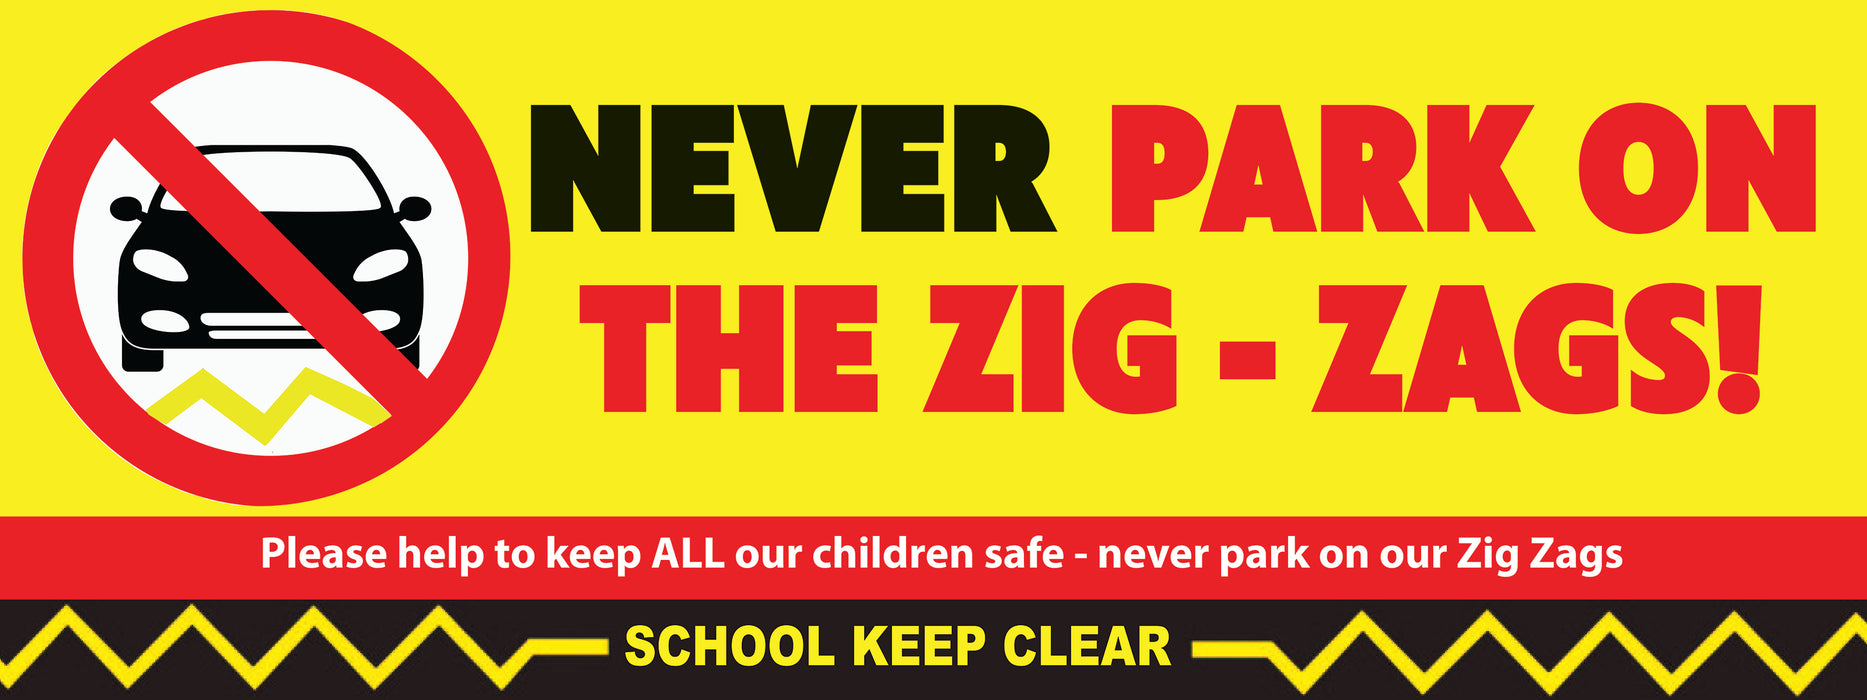 Never park on the zig zags banners